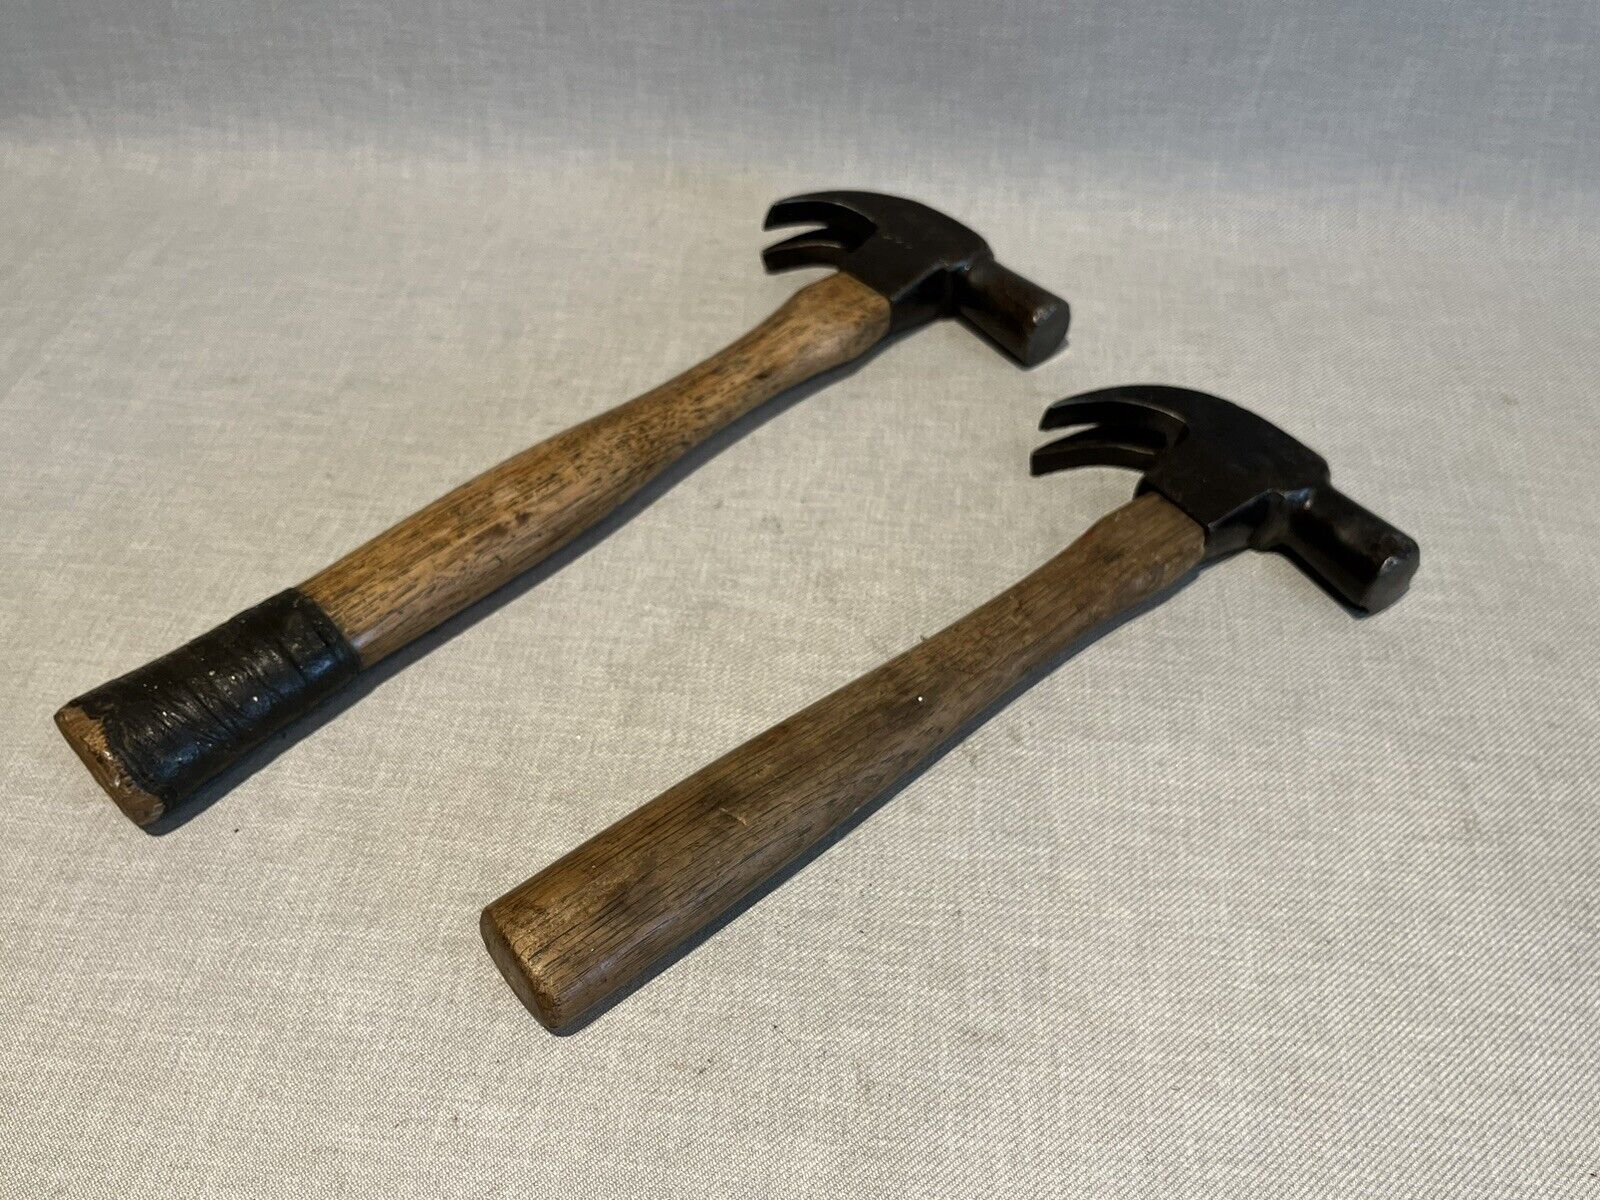 2 Vintage Bullseye Head Carpenter\'s Claw Hammers with Wood Handles - Estate Find